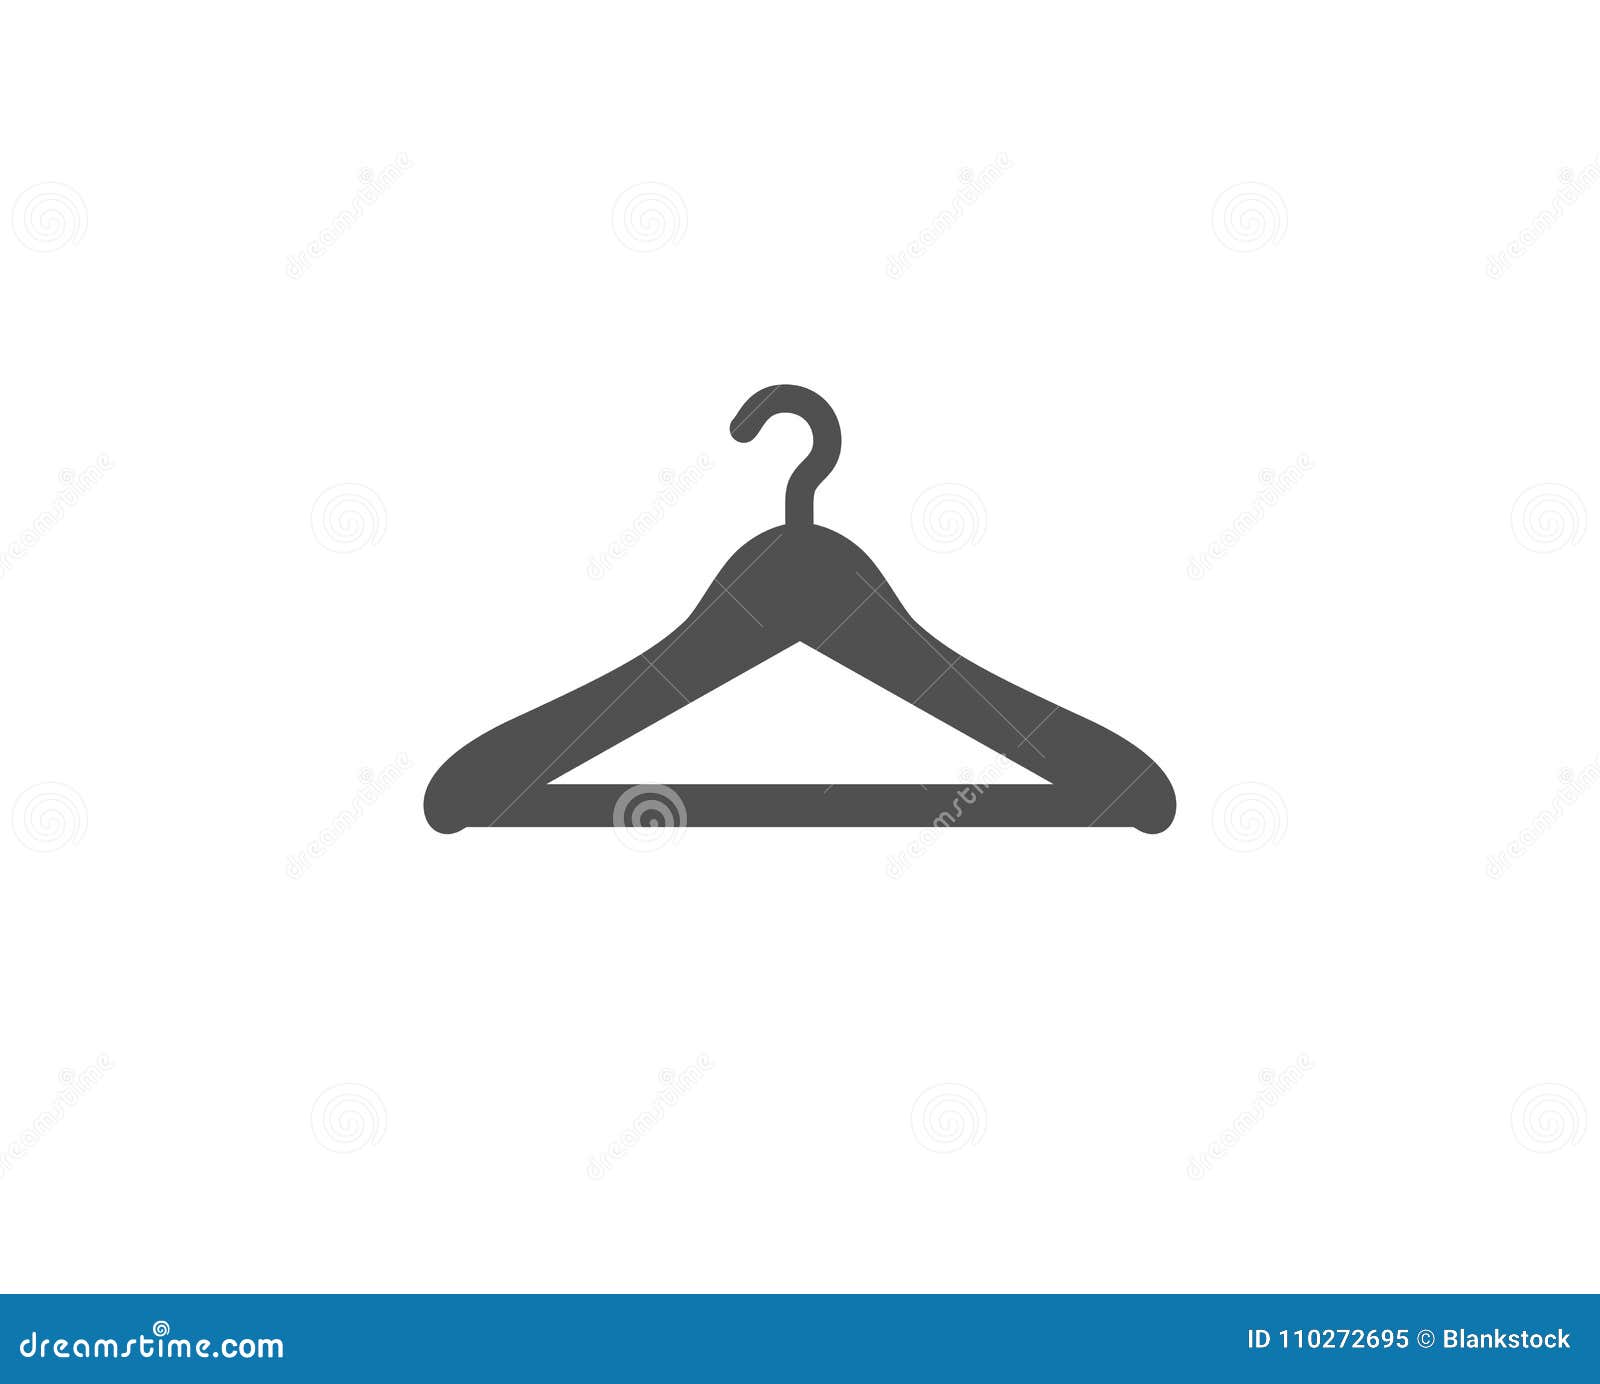 cloakroom simple icon. hanger wardrobe sign.